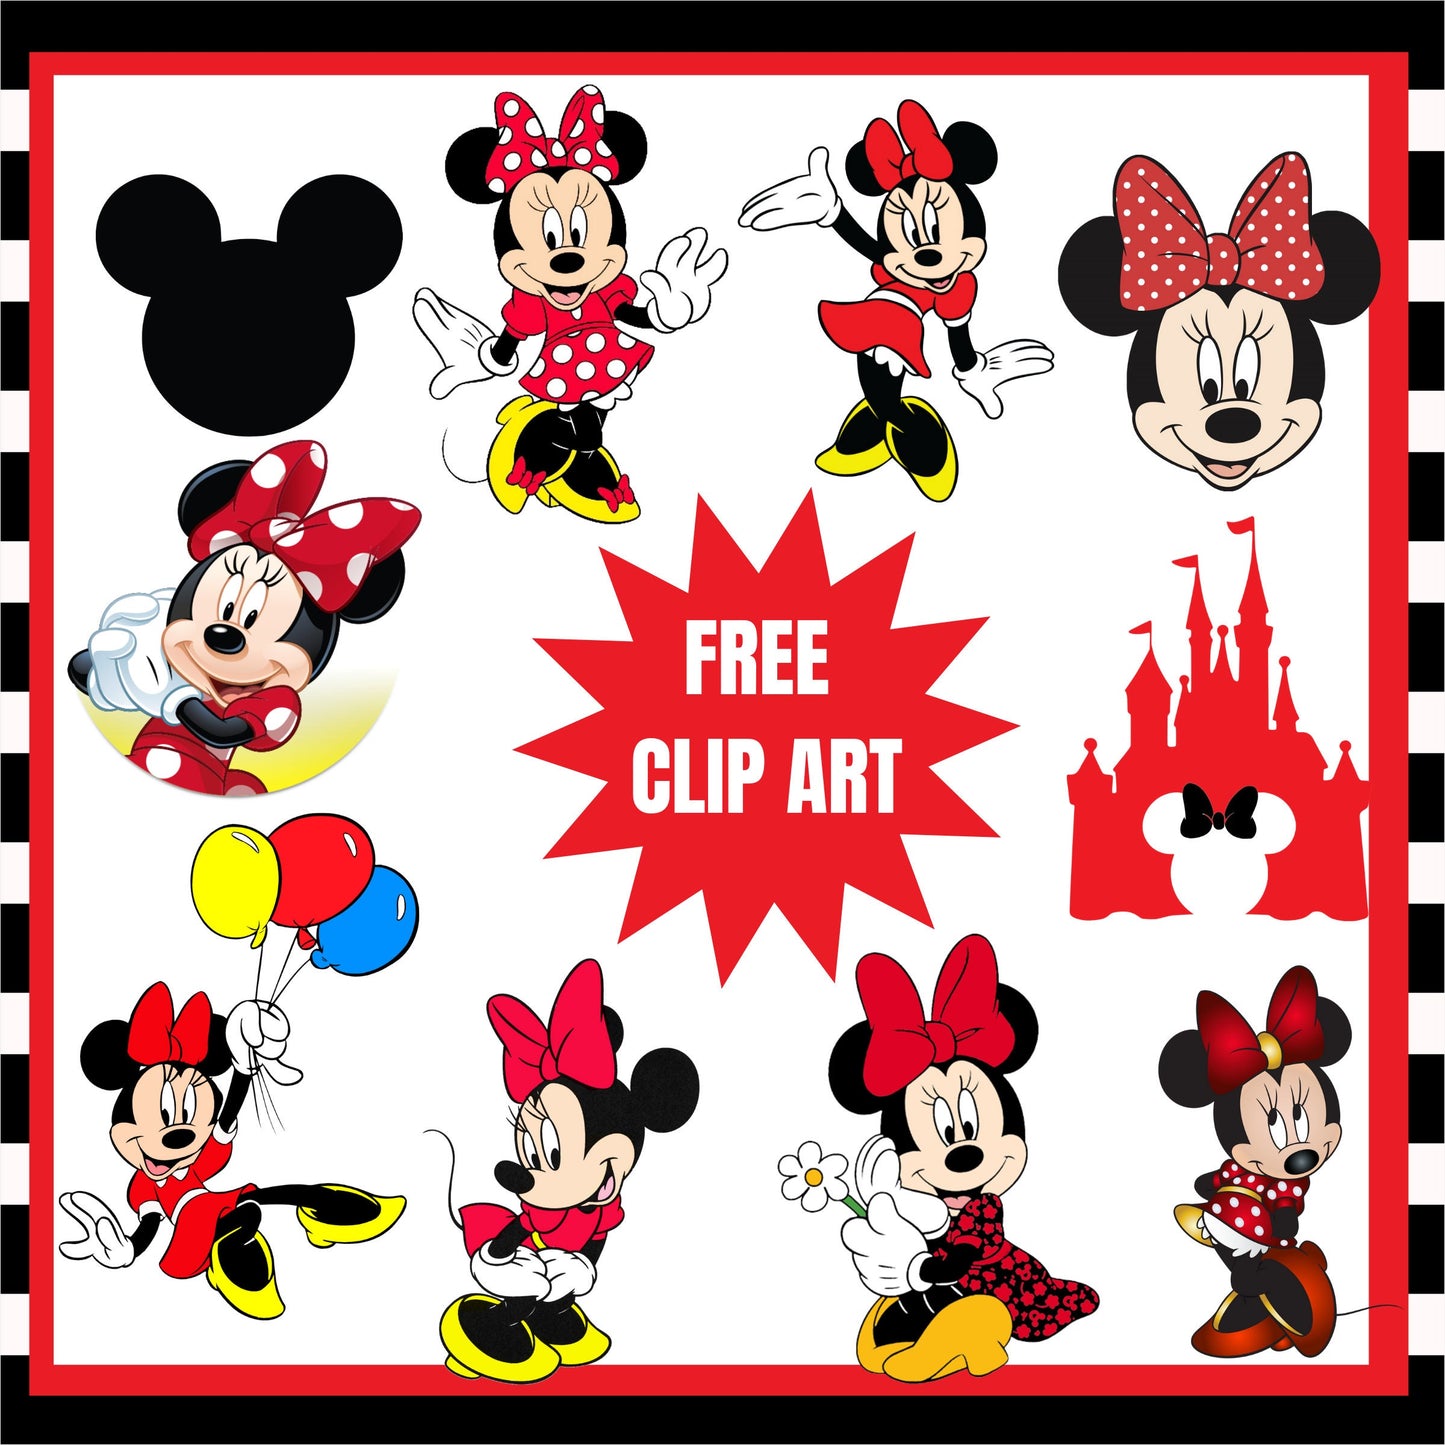 Minnie Mouse Red Yellow digital paper, FREE Clip art, scrapbook papers, wallpaper, Minnie background, polka dots, Red Yellow digital papers - SthrngurlCreations